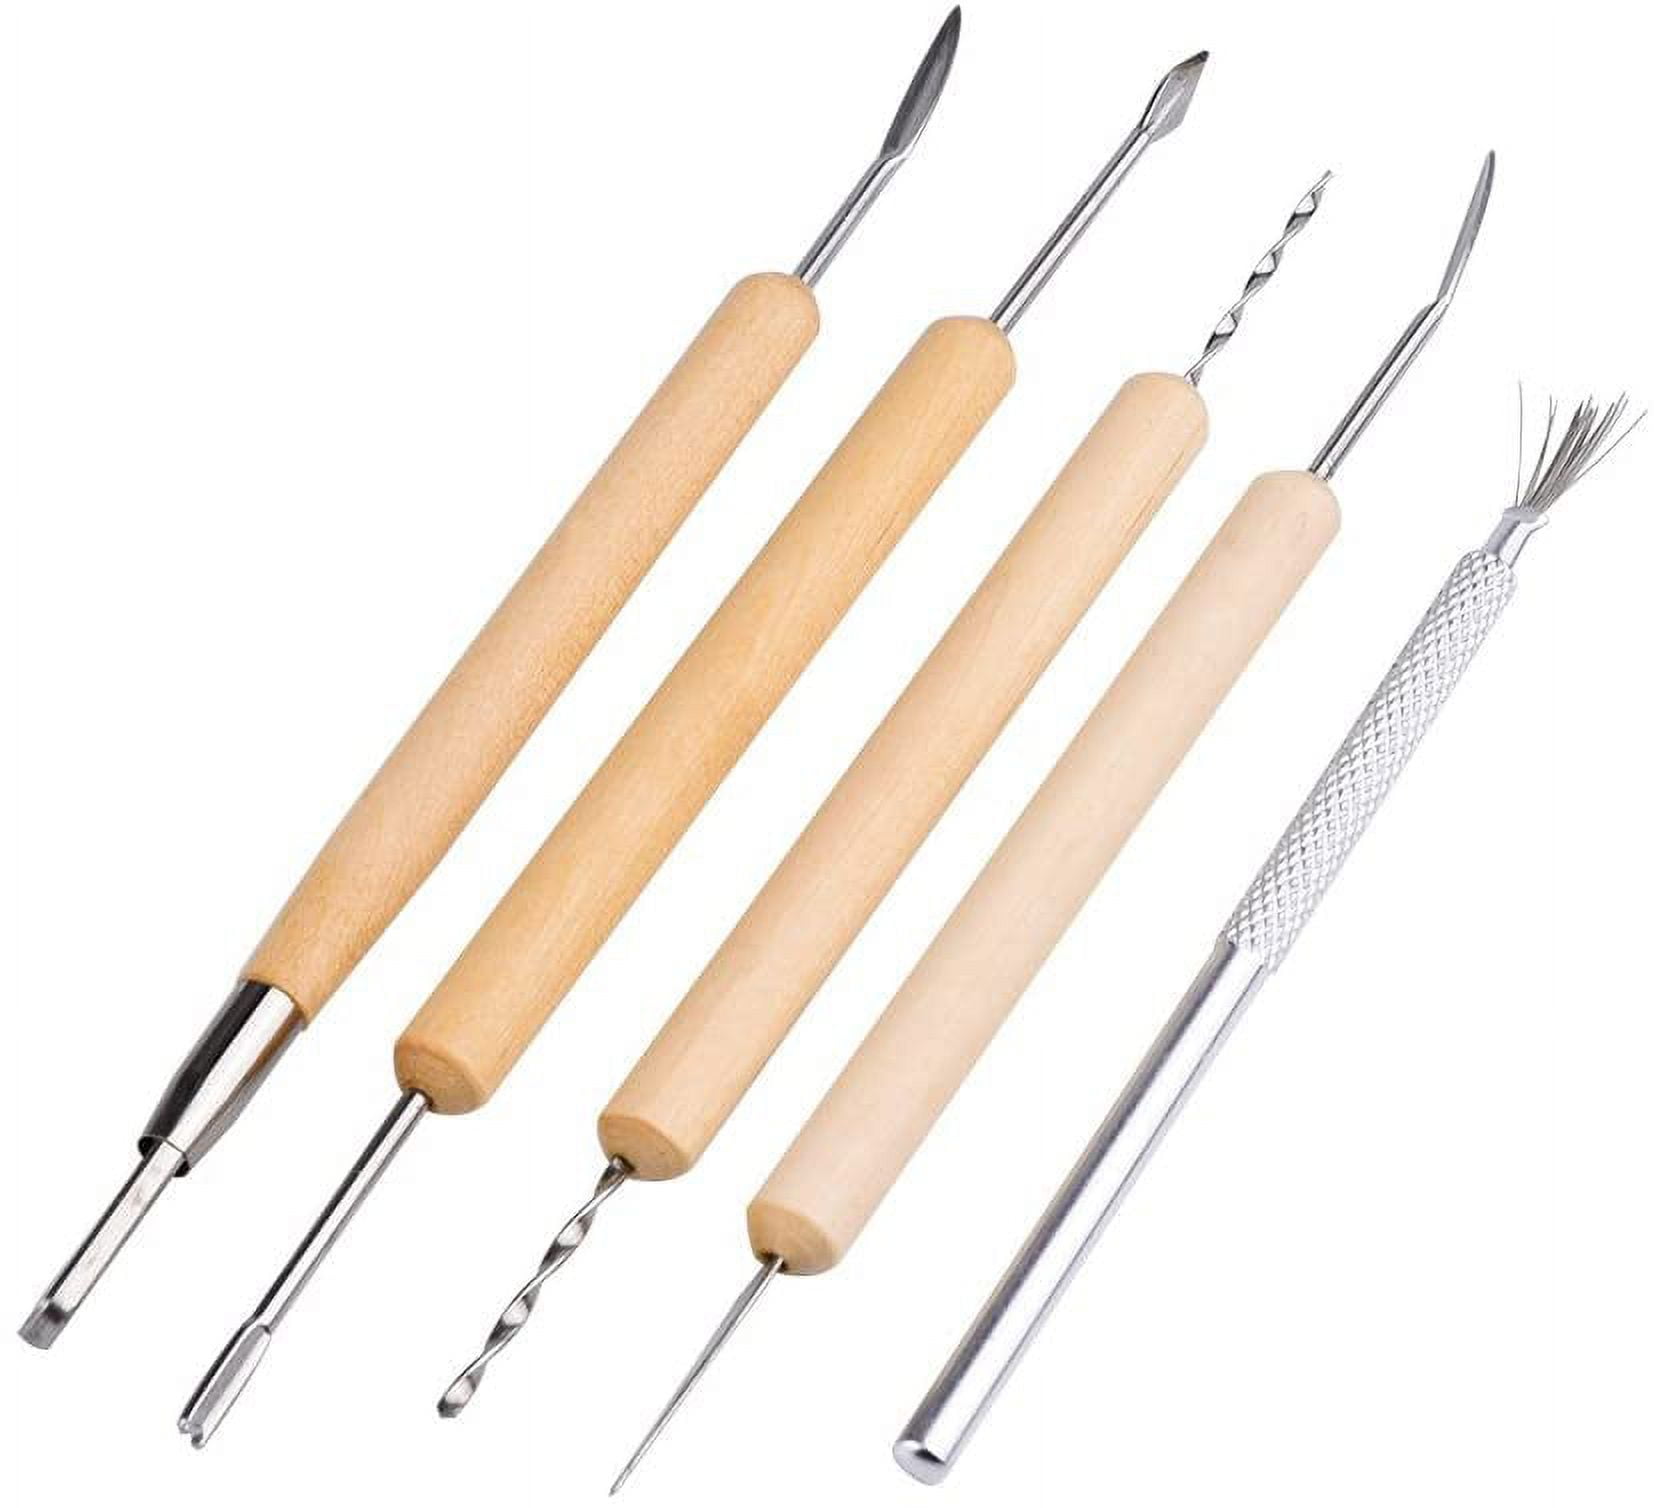 Top Sharp Clay Sculpting Wax Carving Pottery Tools Shapers Wood Handle  Ceramic Pottery Clay Sculpture Carving Tools Factory Price Expert Design  Quality From 4,56 €